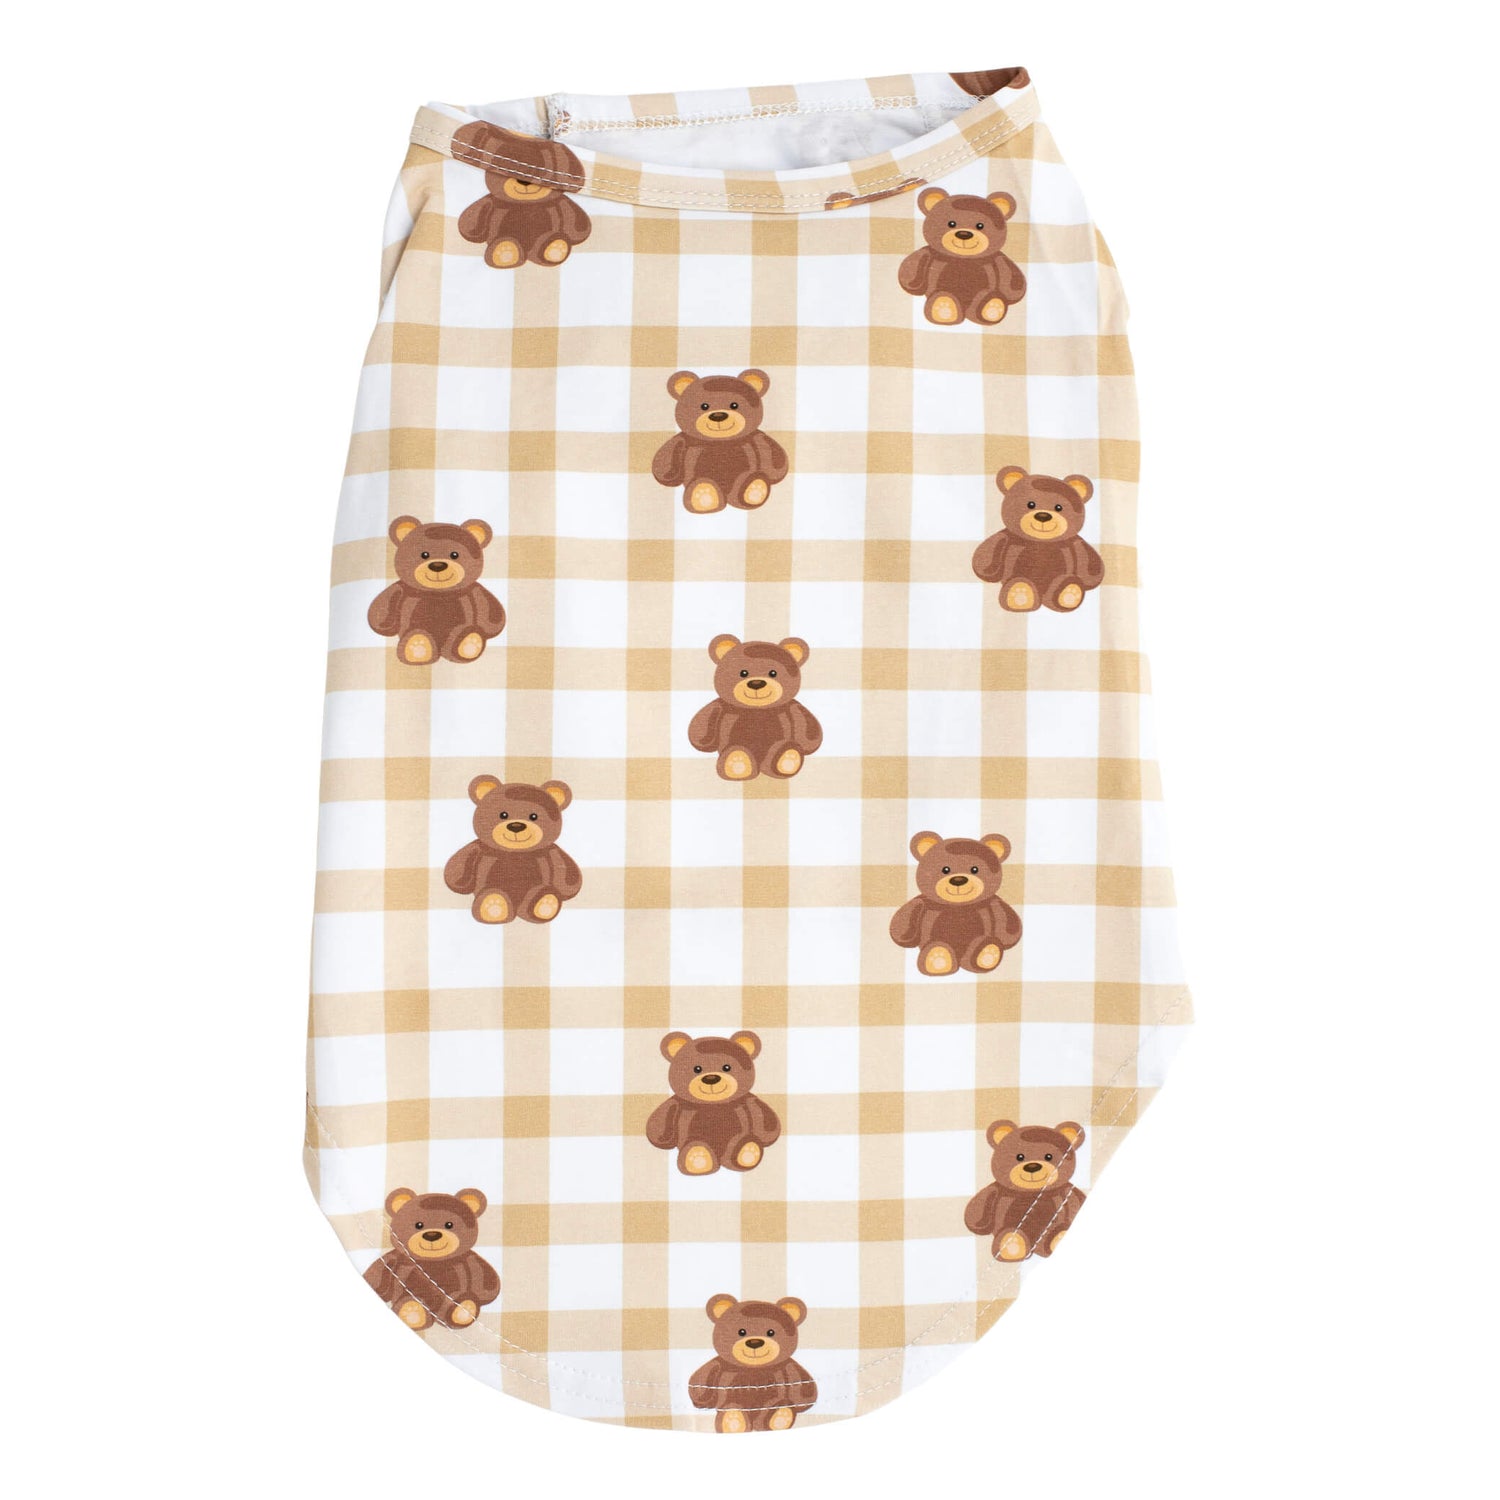 Back profile of Vibrant Hounds Teddy Bear pyjamas for dogs. It is brown and white gingham with teddy bears printed on it.